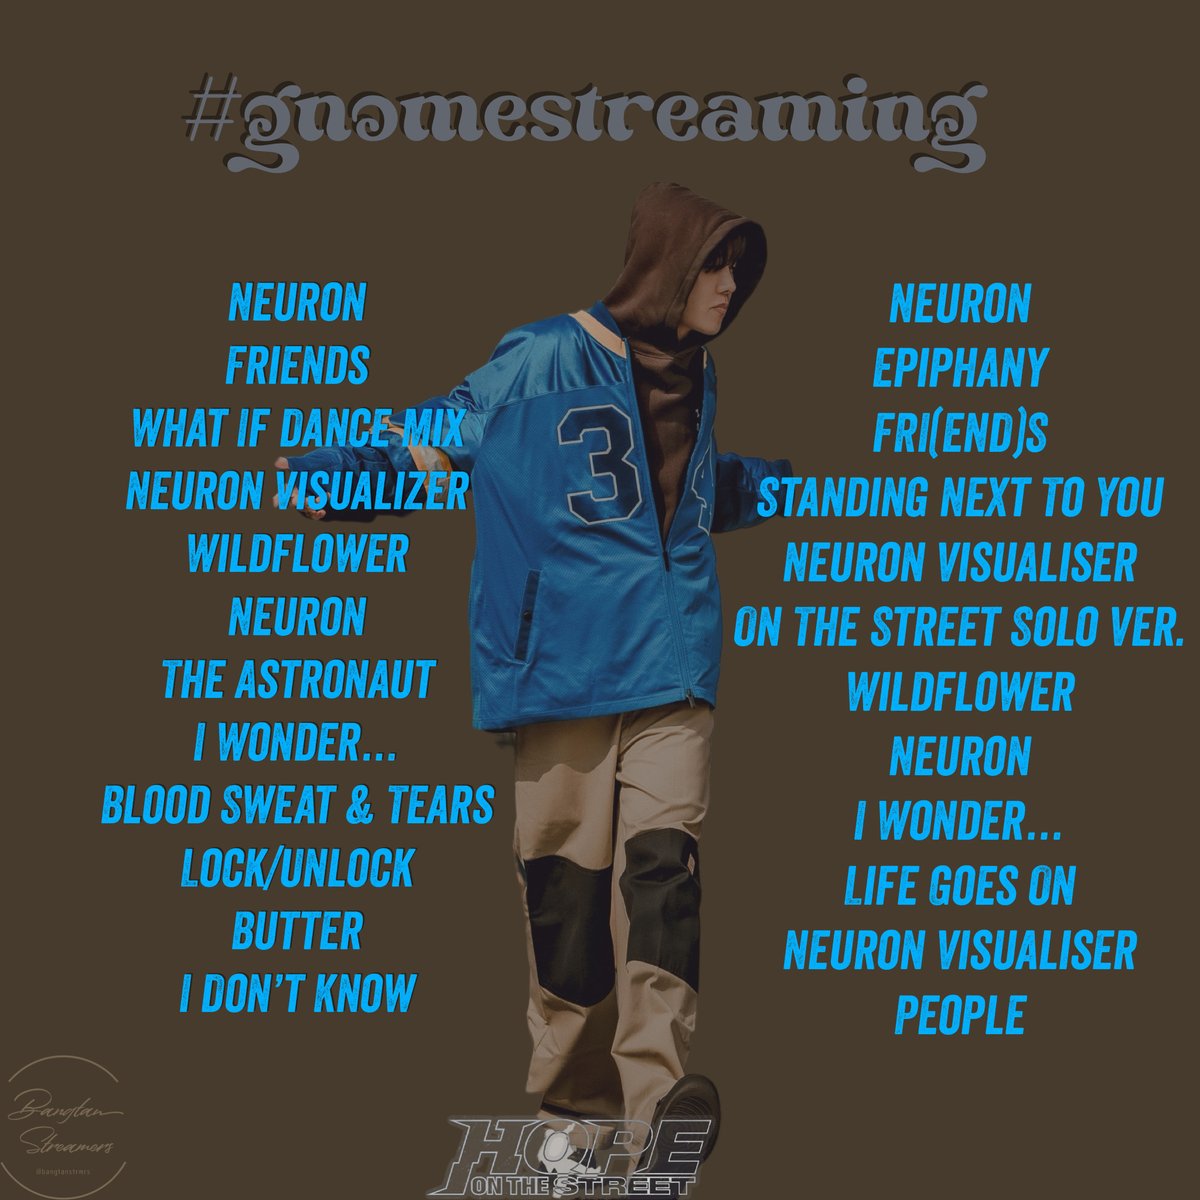 It's time for daily YT streaming. Join in for a short #gnomestreaming - search for and stream listed MVs below ⬇️⬇️ If you can't search manually at this time, please use this short PL. Consider turning it into a queue! ▶️youtube.com/playlist?list=… #HOPE_ON_THE_STREET #NEURON